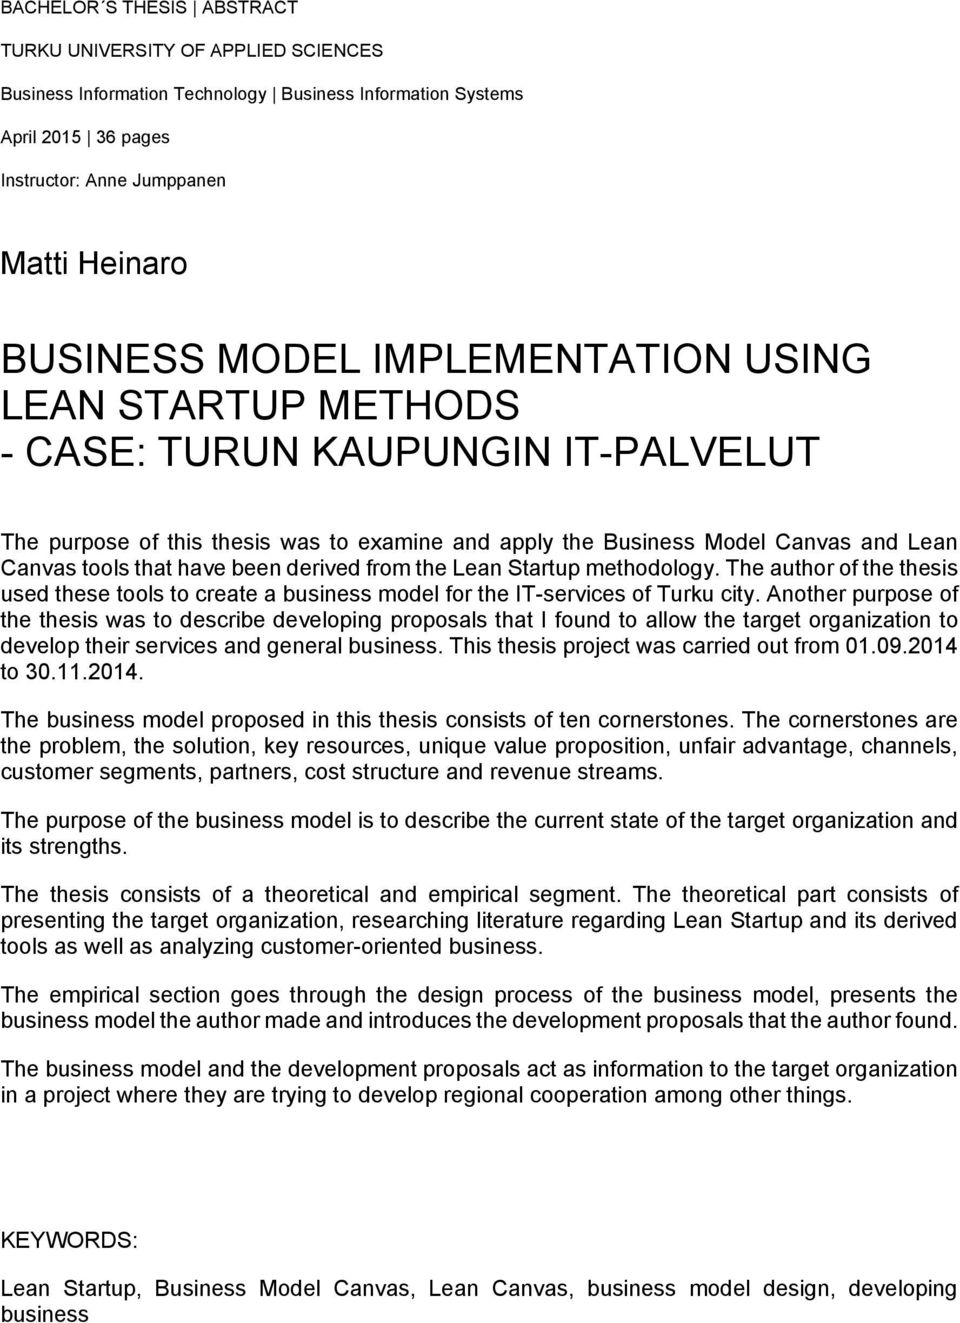 derived from the Lean Startup methodology. The author of the thesis used these tools to create a business model for the IT-services of Turku city.